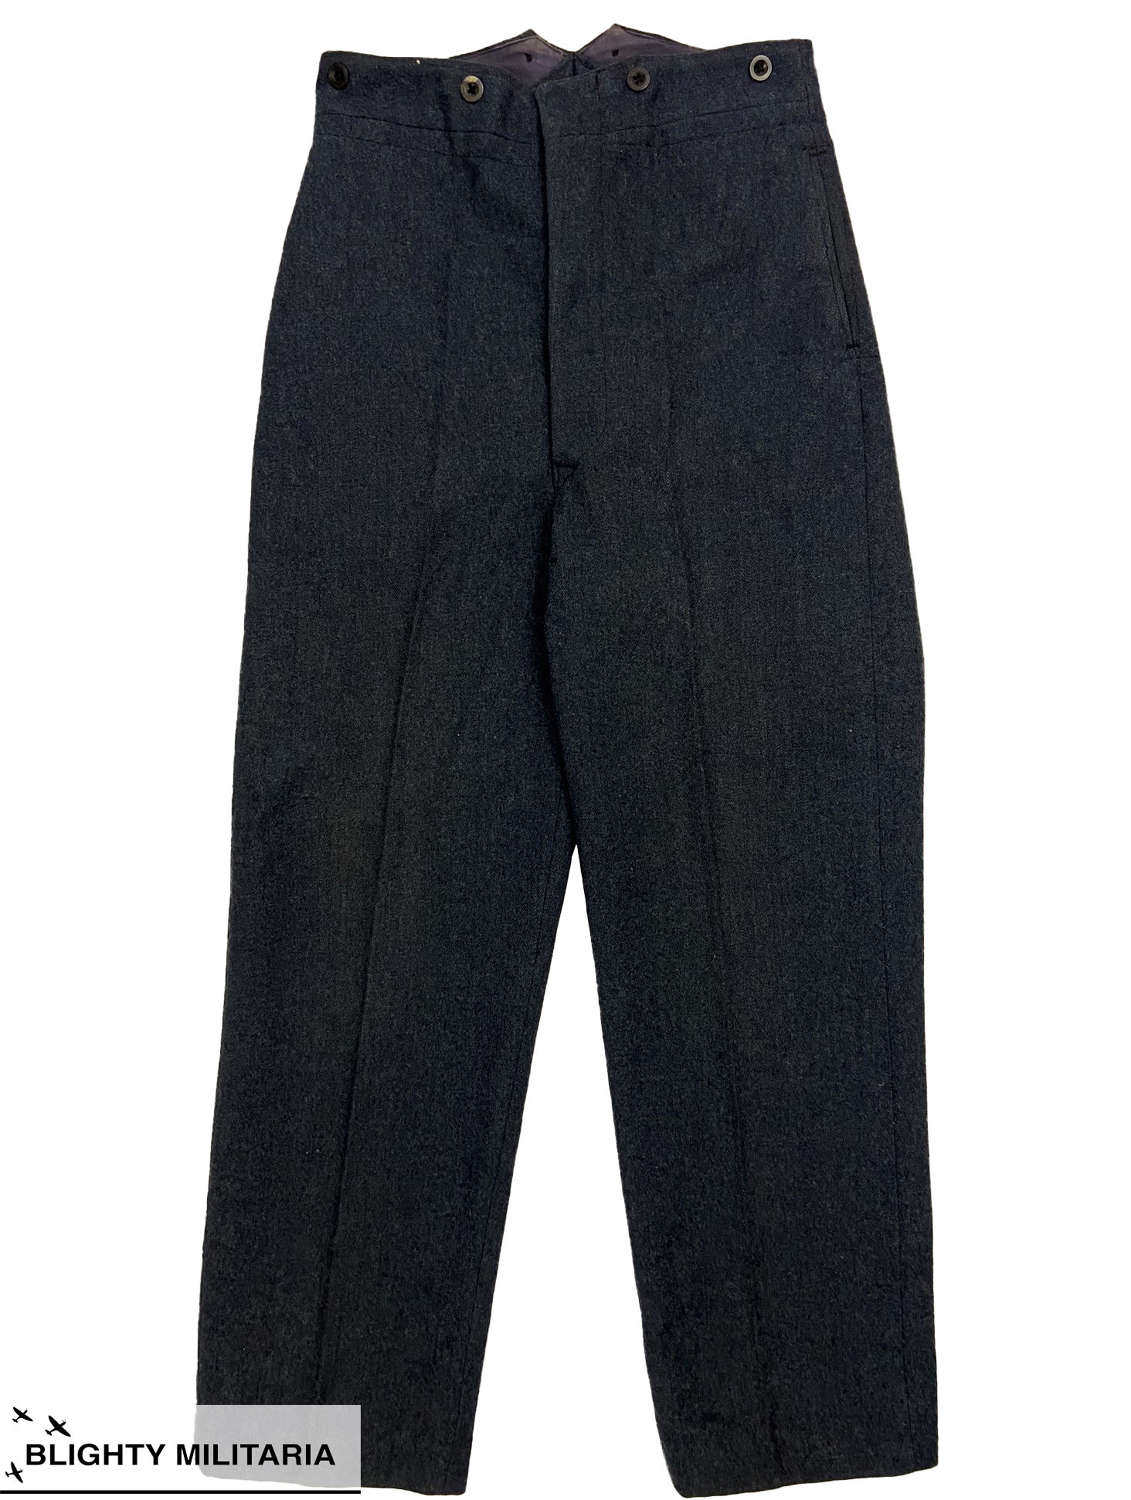 Original 1949 Dated RAF Ordinary Airman's Trousers - Size 27